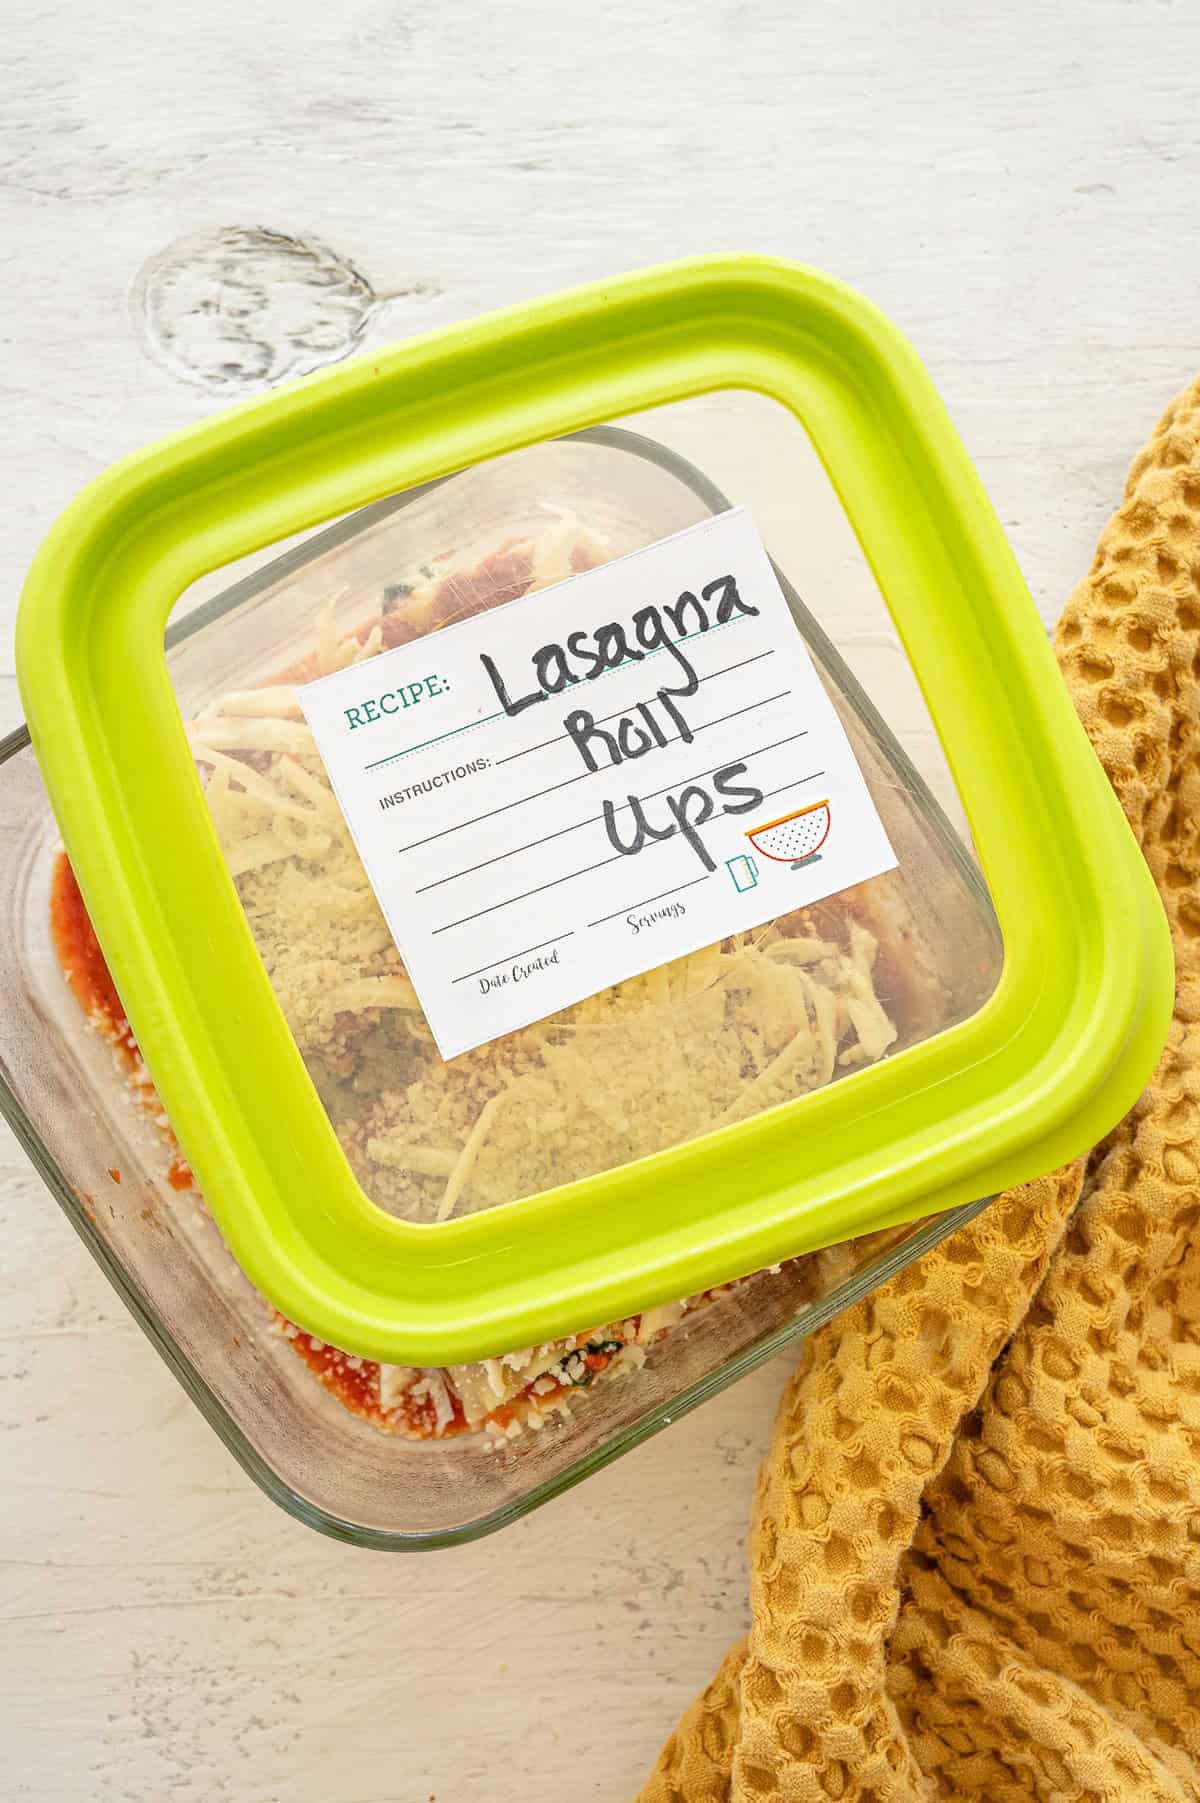 Spinach lasagna rolls in a glass baking dish with a label on the lid ready for the freezer.